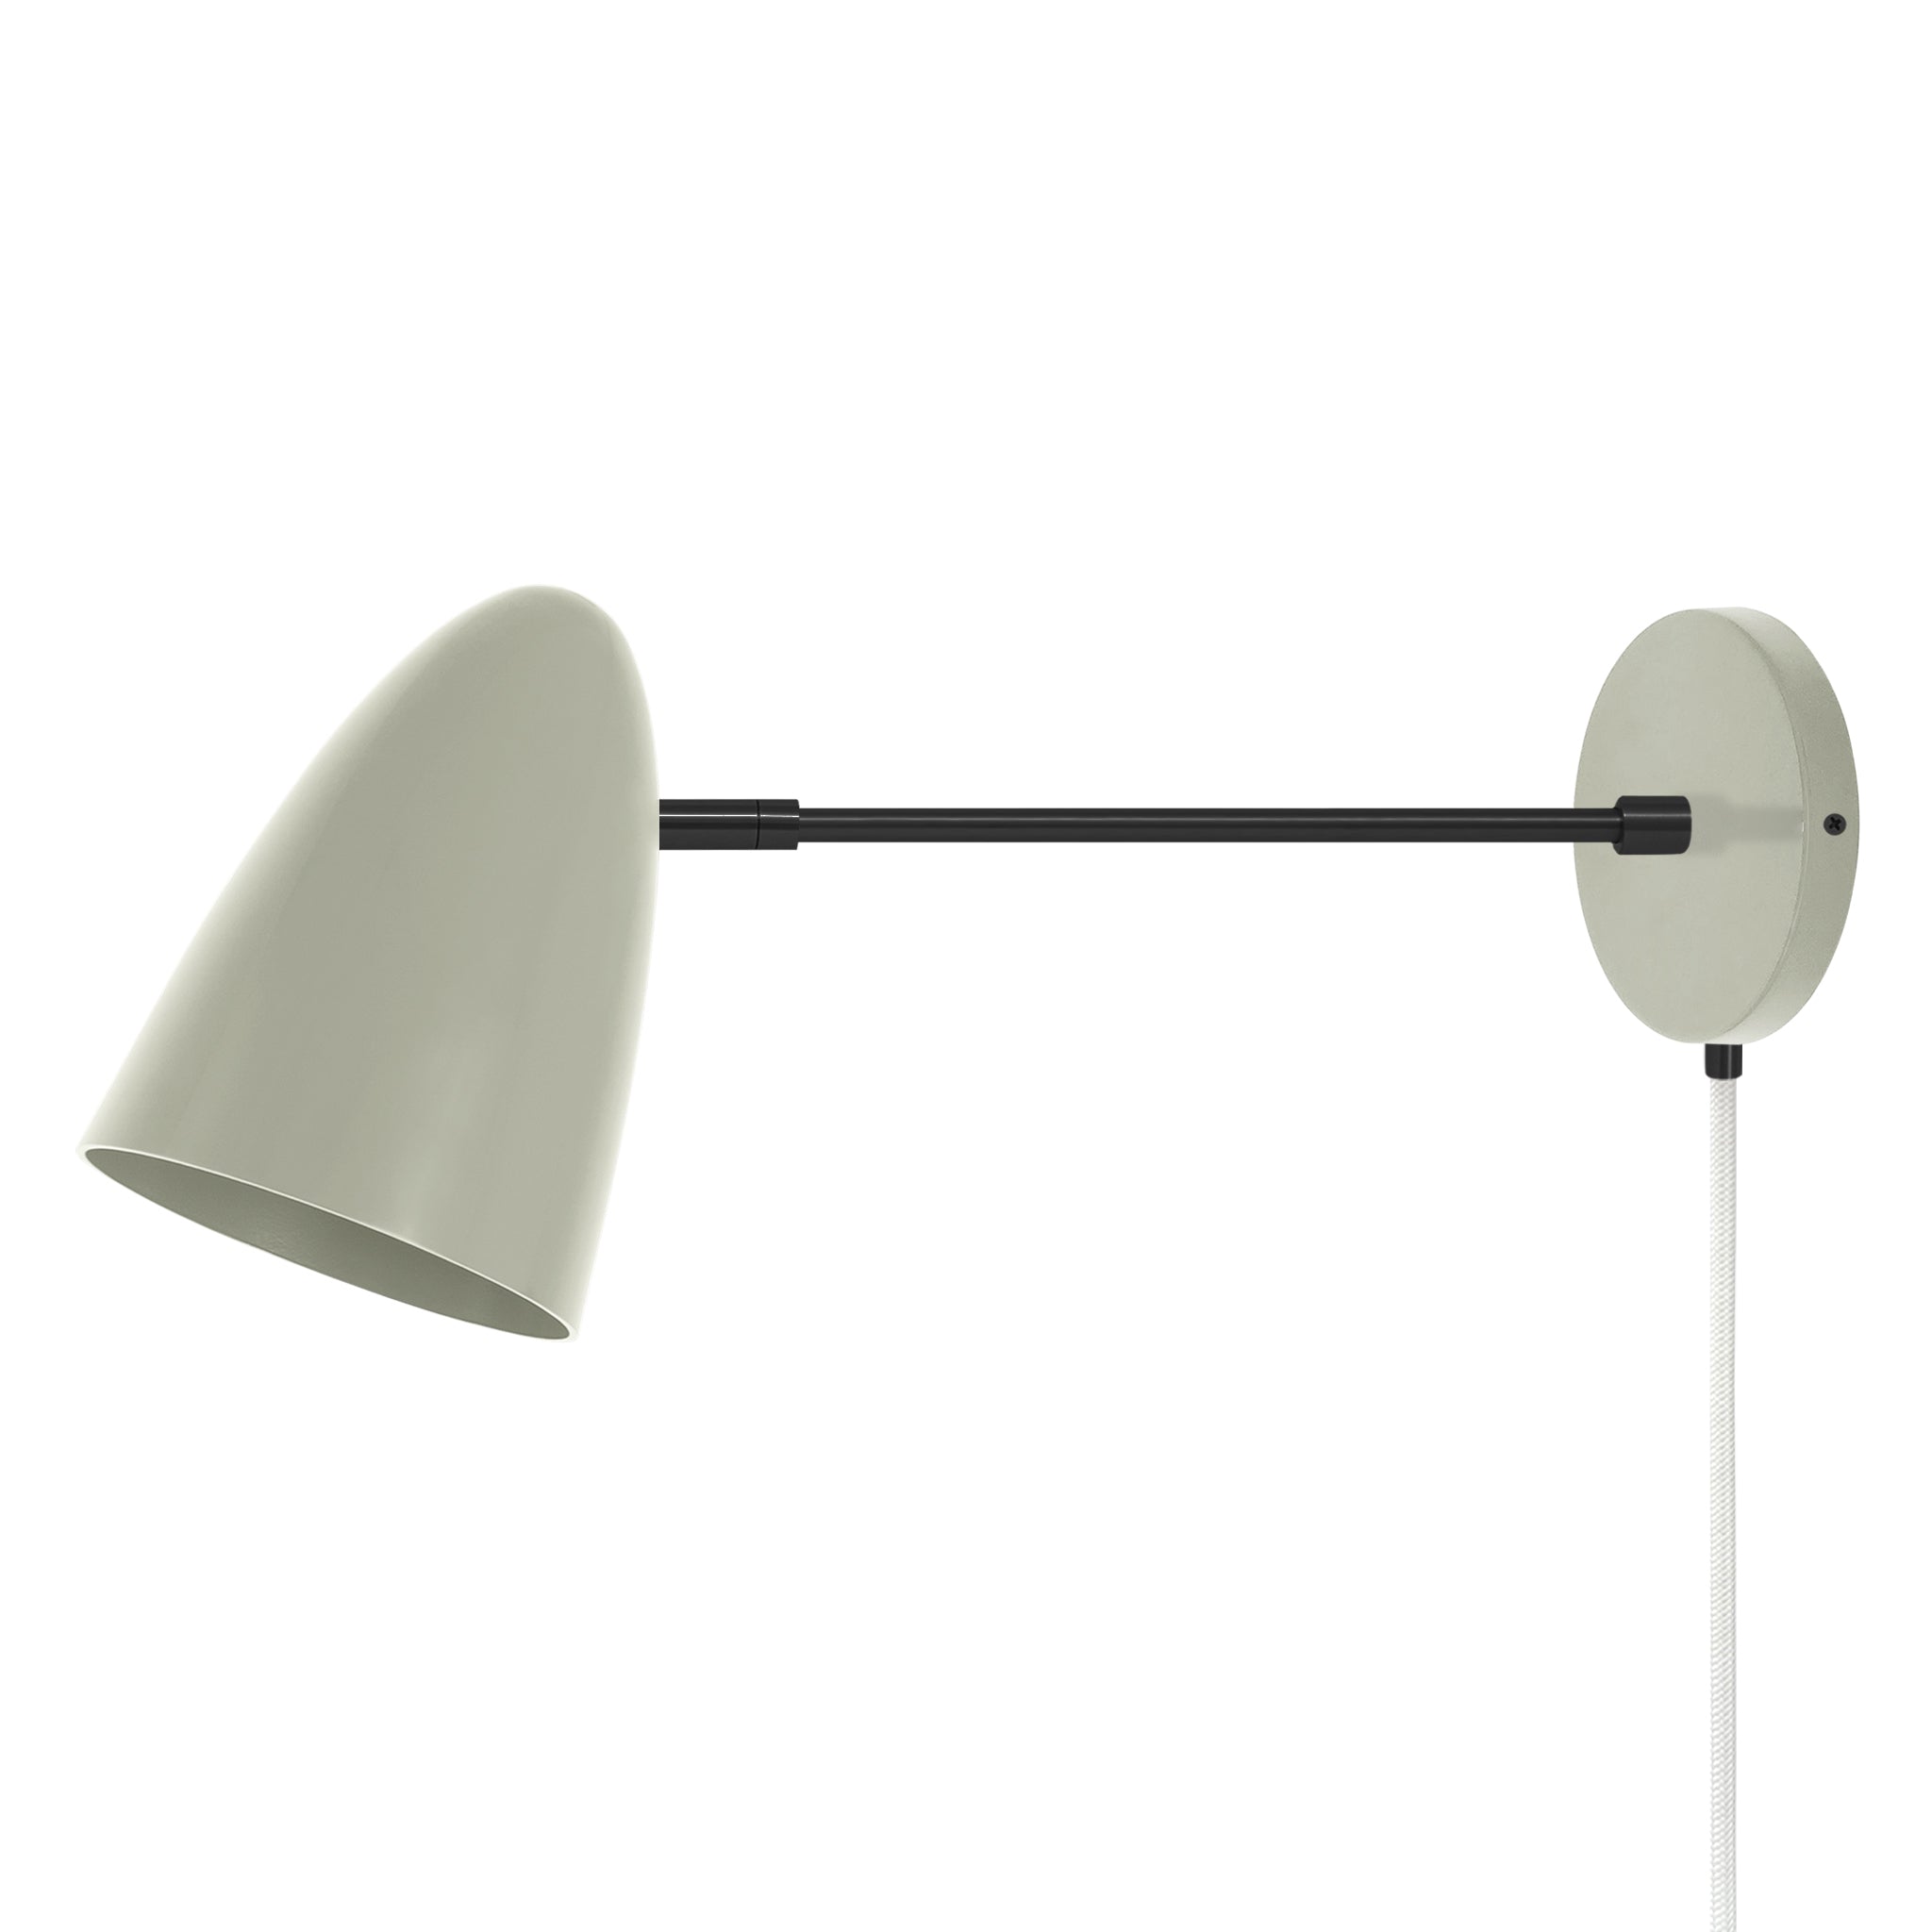 Black and spa color Boom plug-in sconce 10" arm Dutton Brown lighting